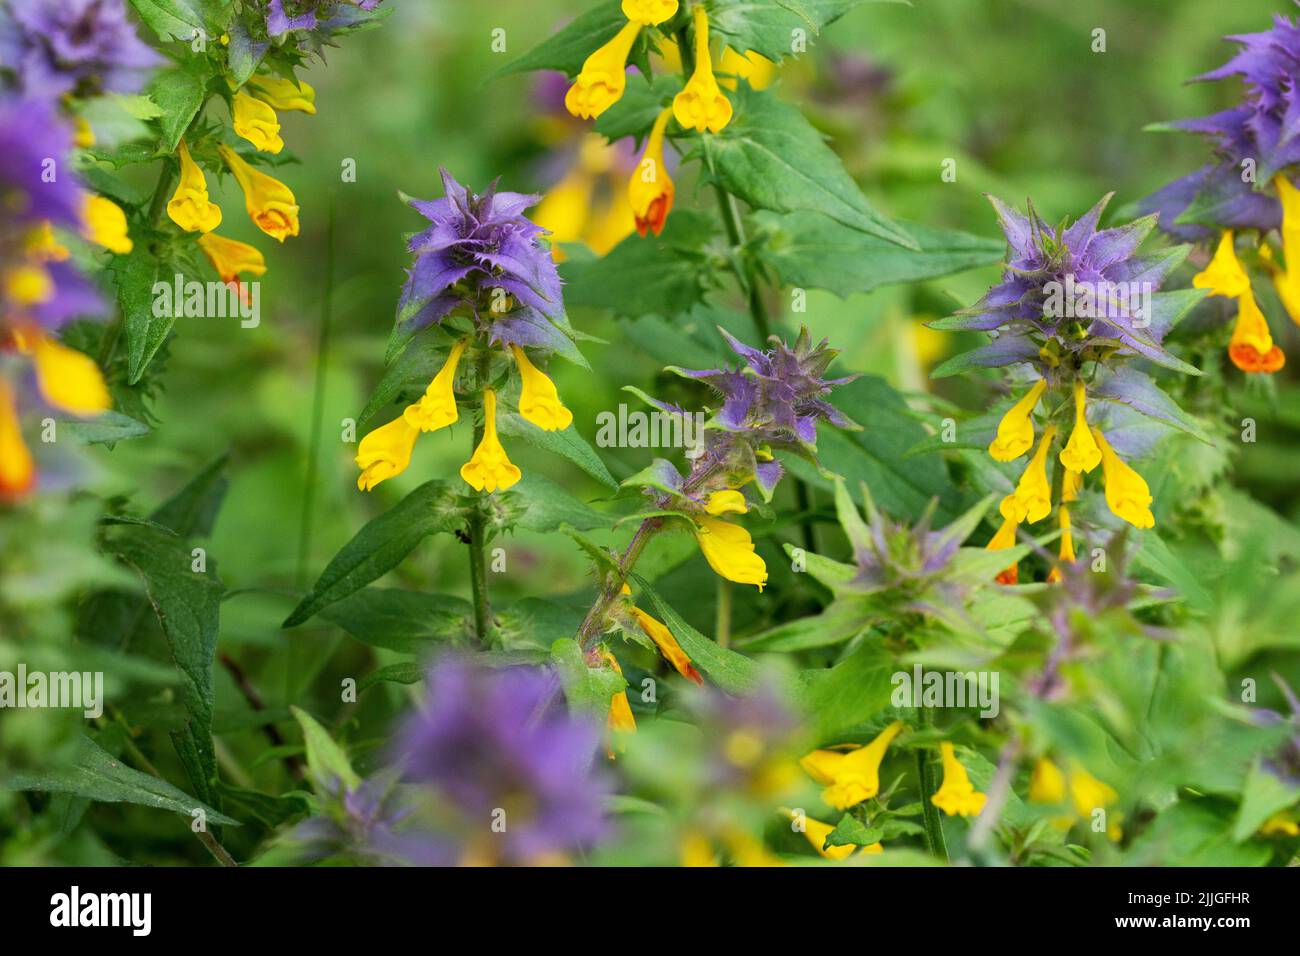 Melampyrum nemorosum is an herbaceous flowering plant in the family Orobanchaceae. It is native to Europe. Stock Photo